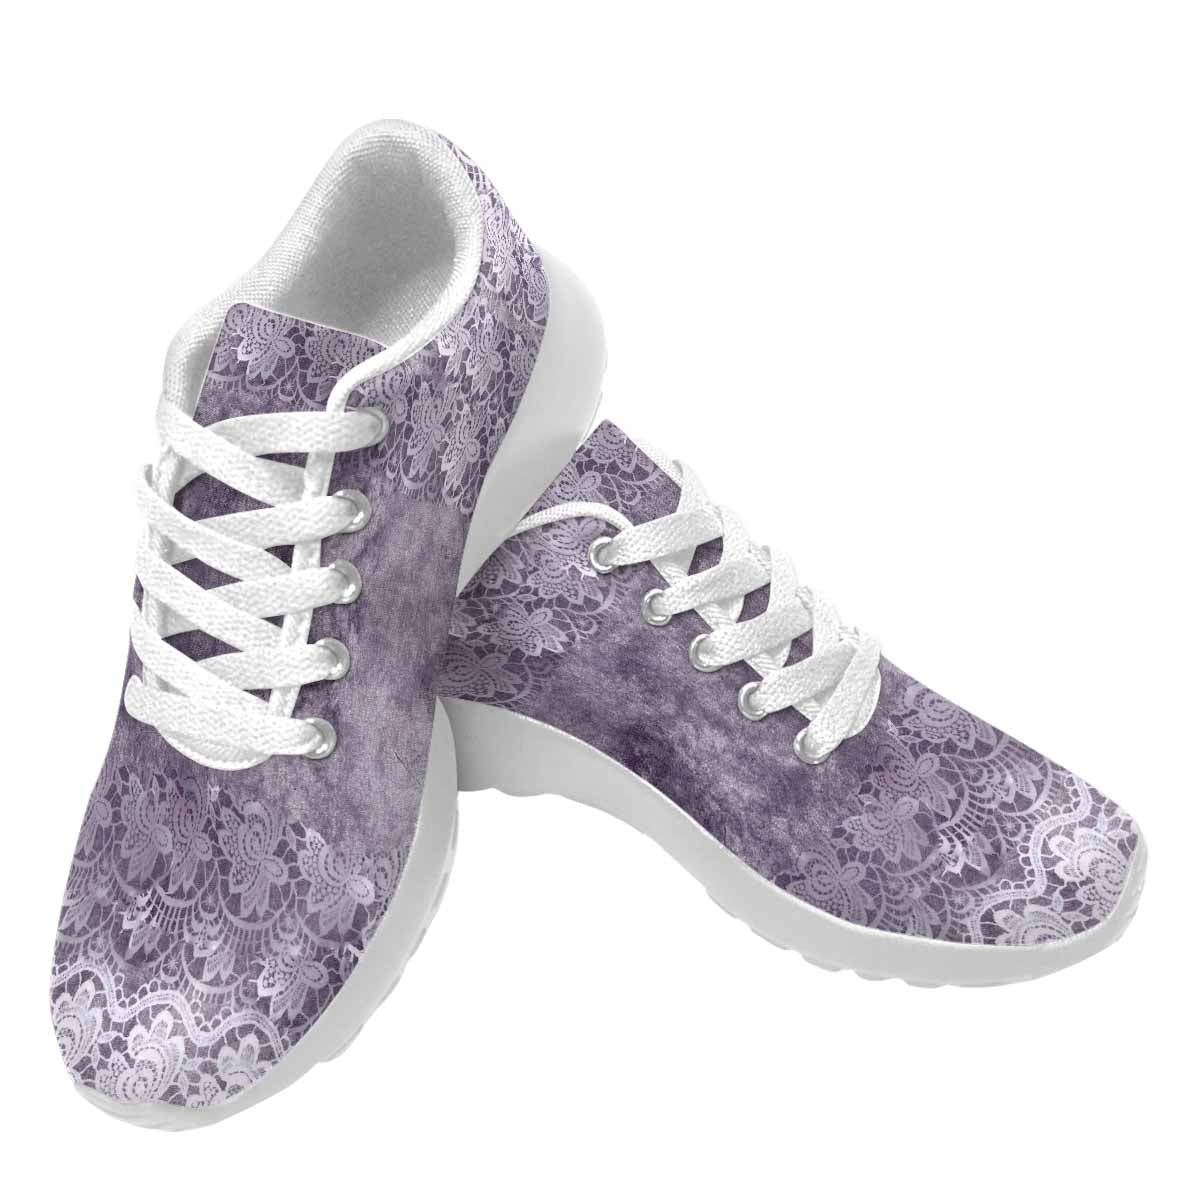 Victorian lace print, womens cute casual or running sneakers, design 39